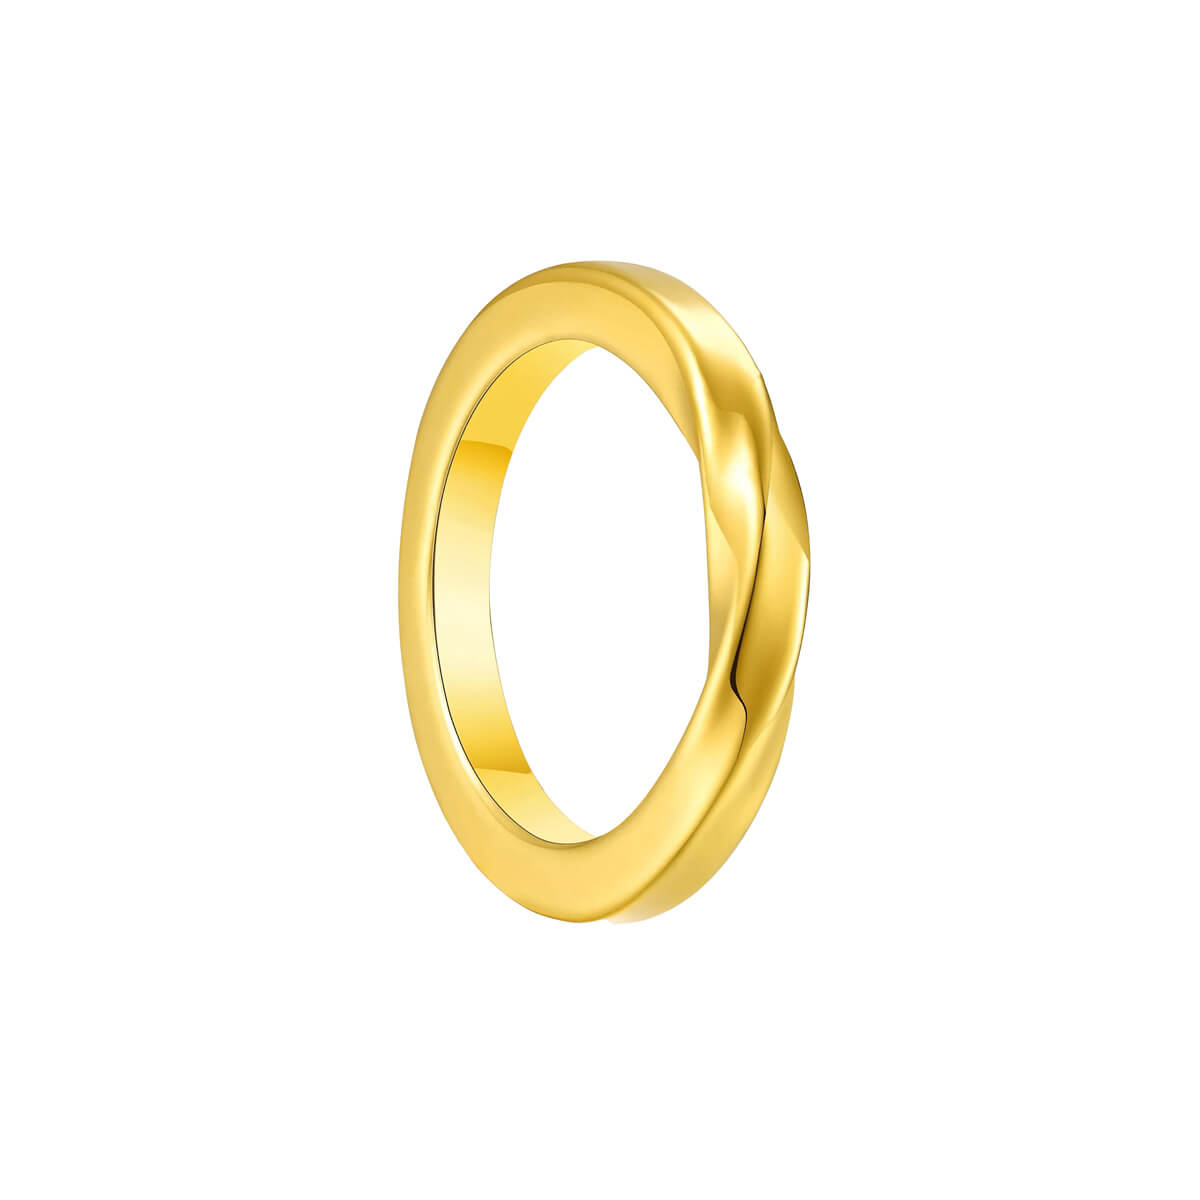 Strong twisted gold plated steel ring (Steel 316L)